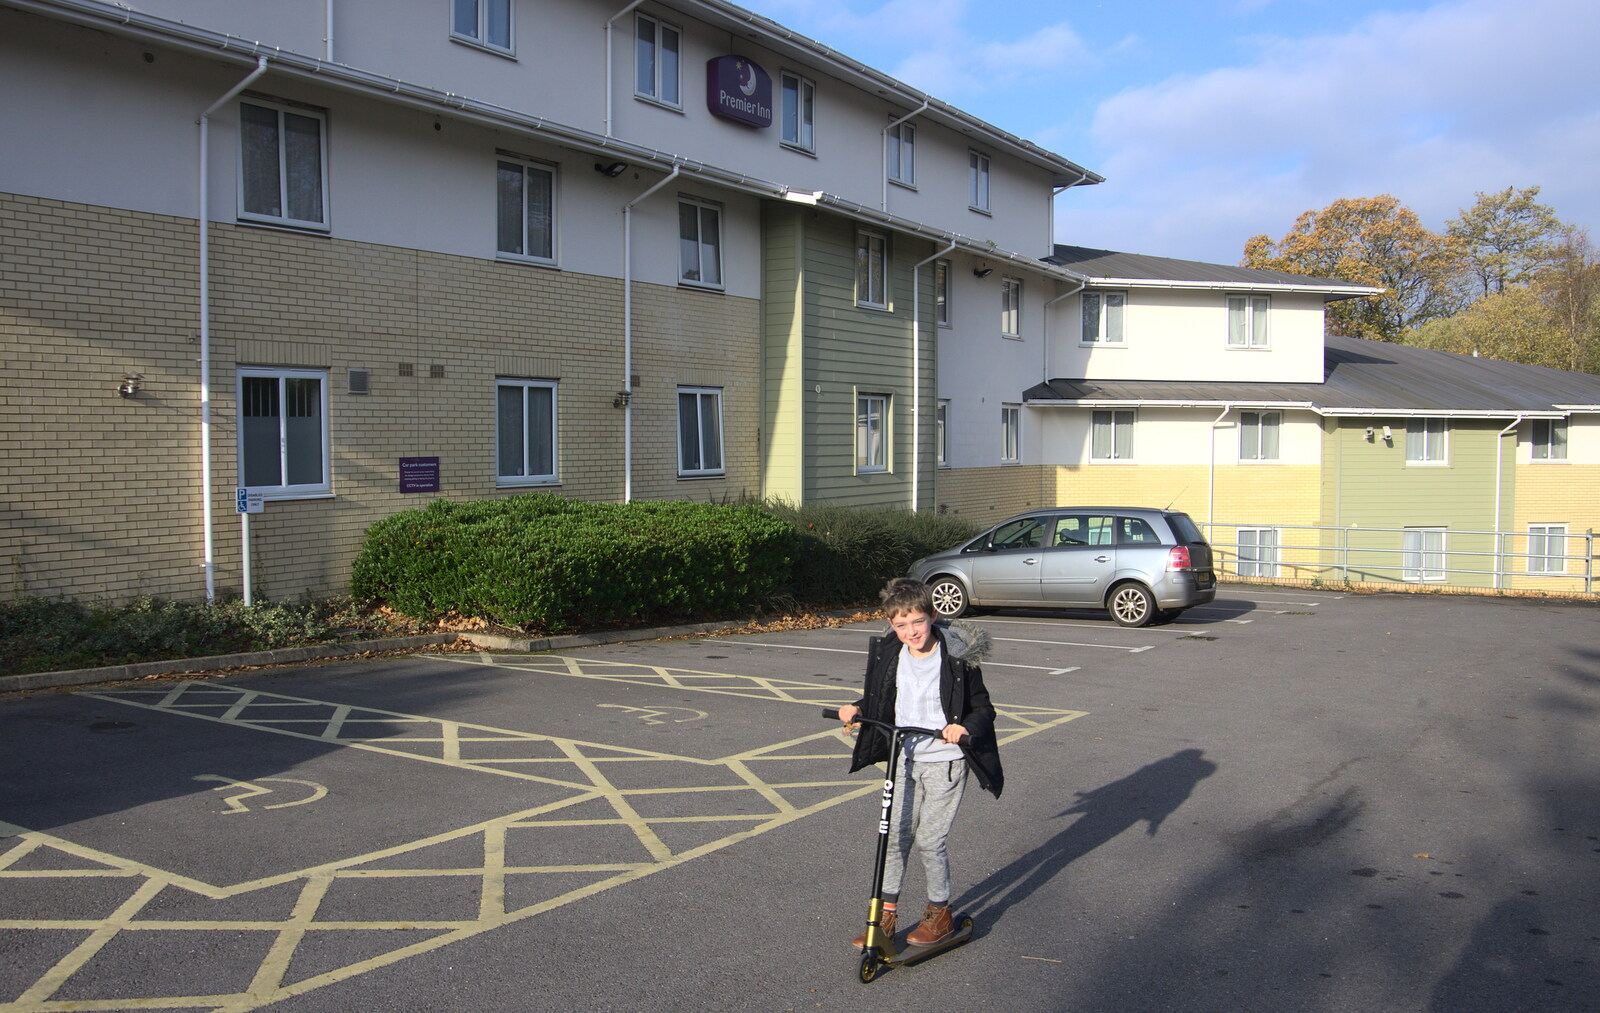 Fred scoots about the Premier Inn car park from Thanksgiving in Highcliffe, Dorset - 23rd November 2018